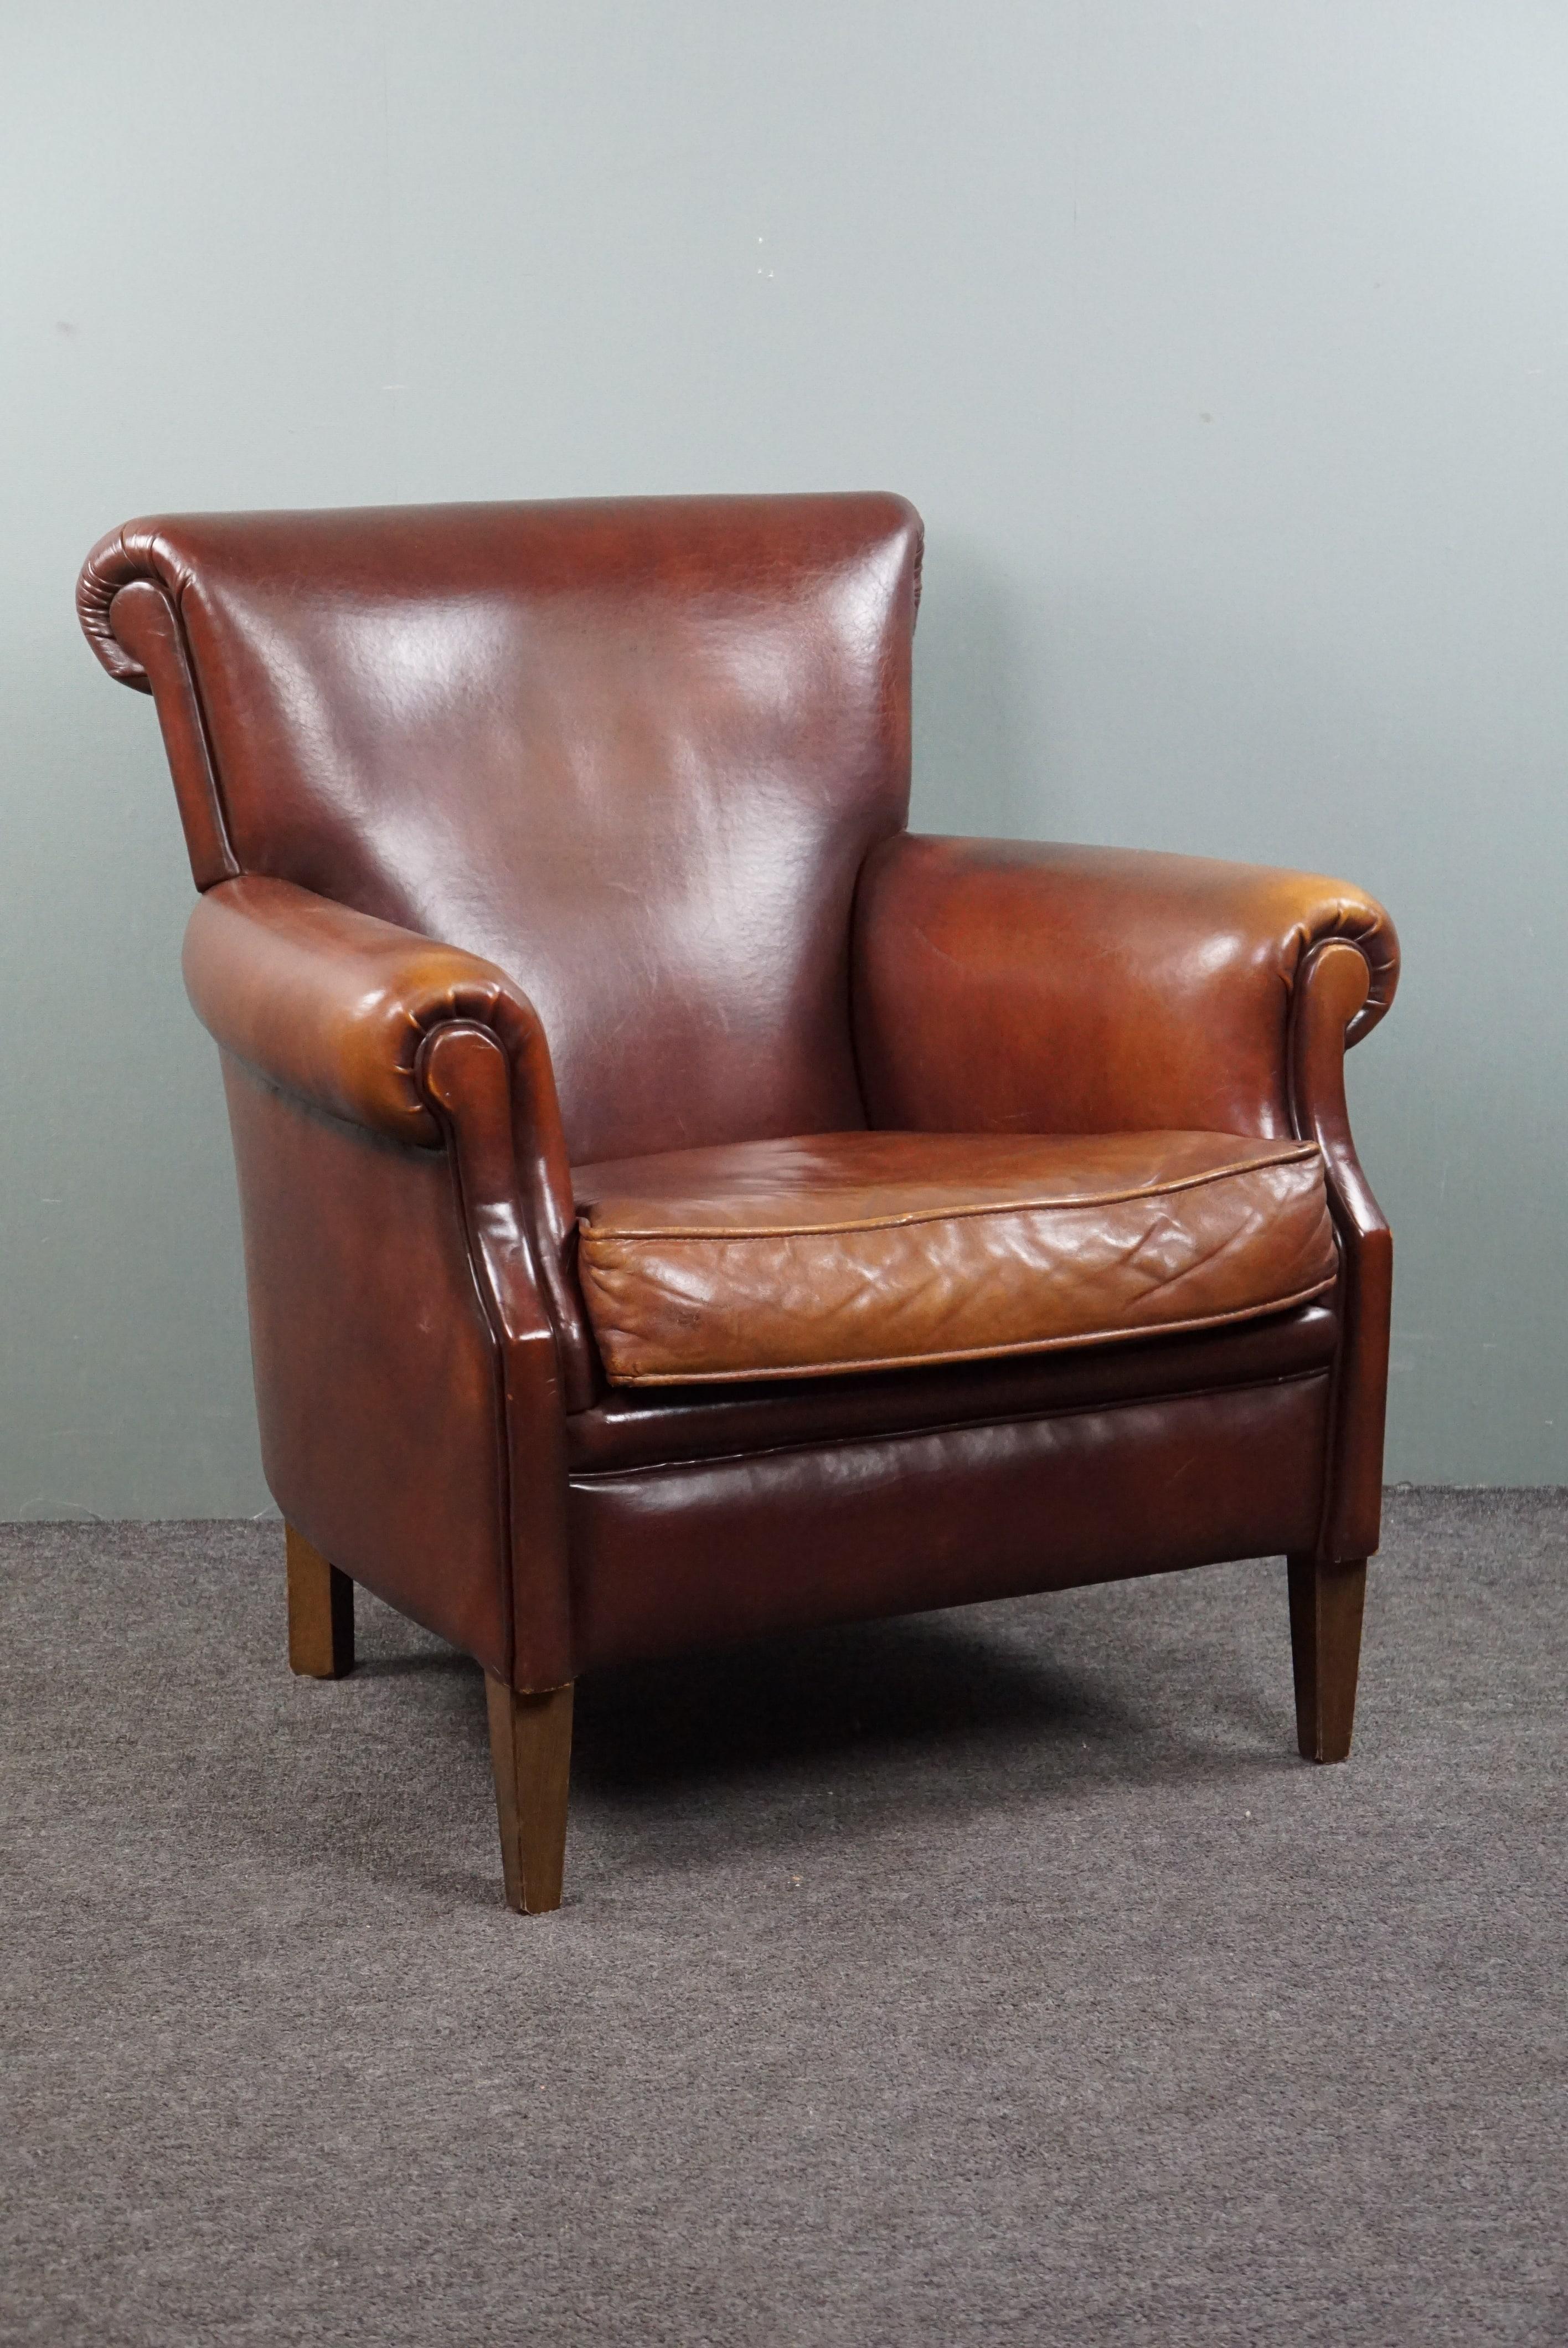 Offered this beautiful sheepskin leather armchair with a higher back.

This sheepskin leather armchair, in very good condition, is a true crowd-pleaser, providing physical comfort and relaxation when you take a seat. With its subtle appearance, it's